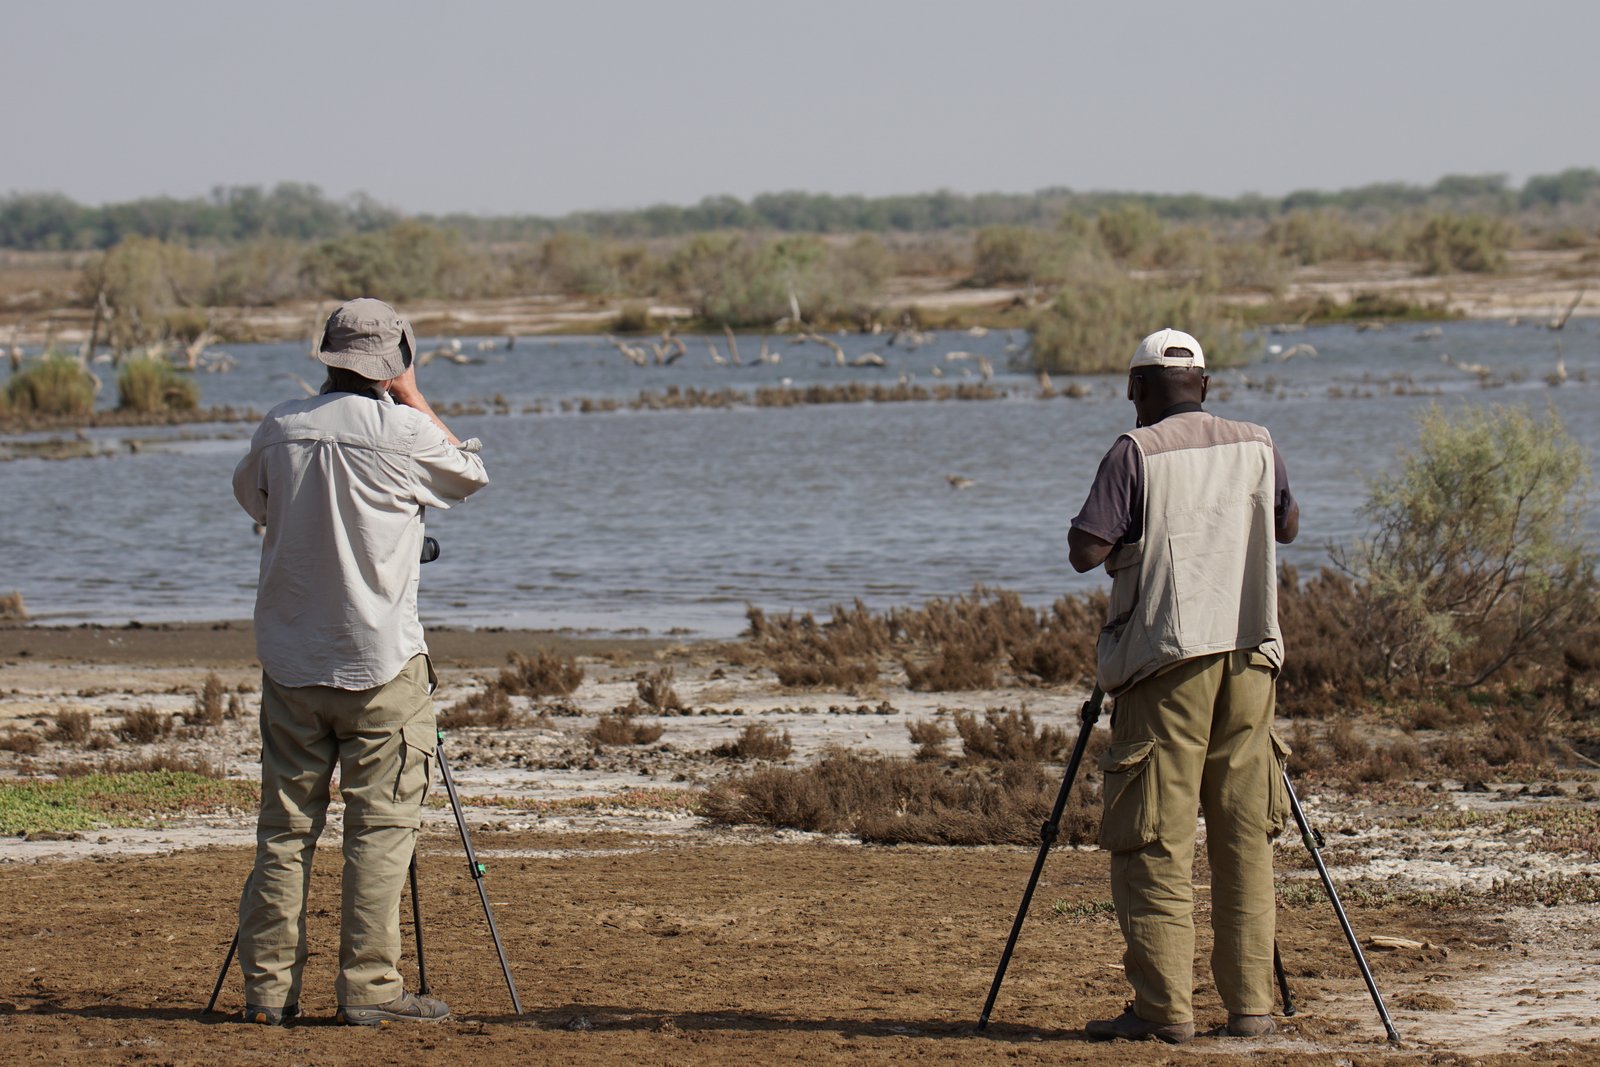 Dr. Johannes Melter (BIOCON) and the local bird guide Idrissa Ndiaye observe meadow birds in the Djoudj National Park, Senegal. Photo: C. Marlow/NLWKN